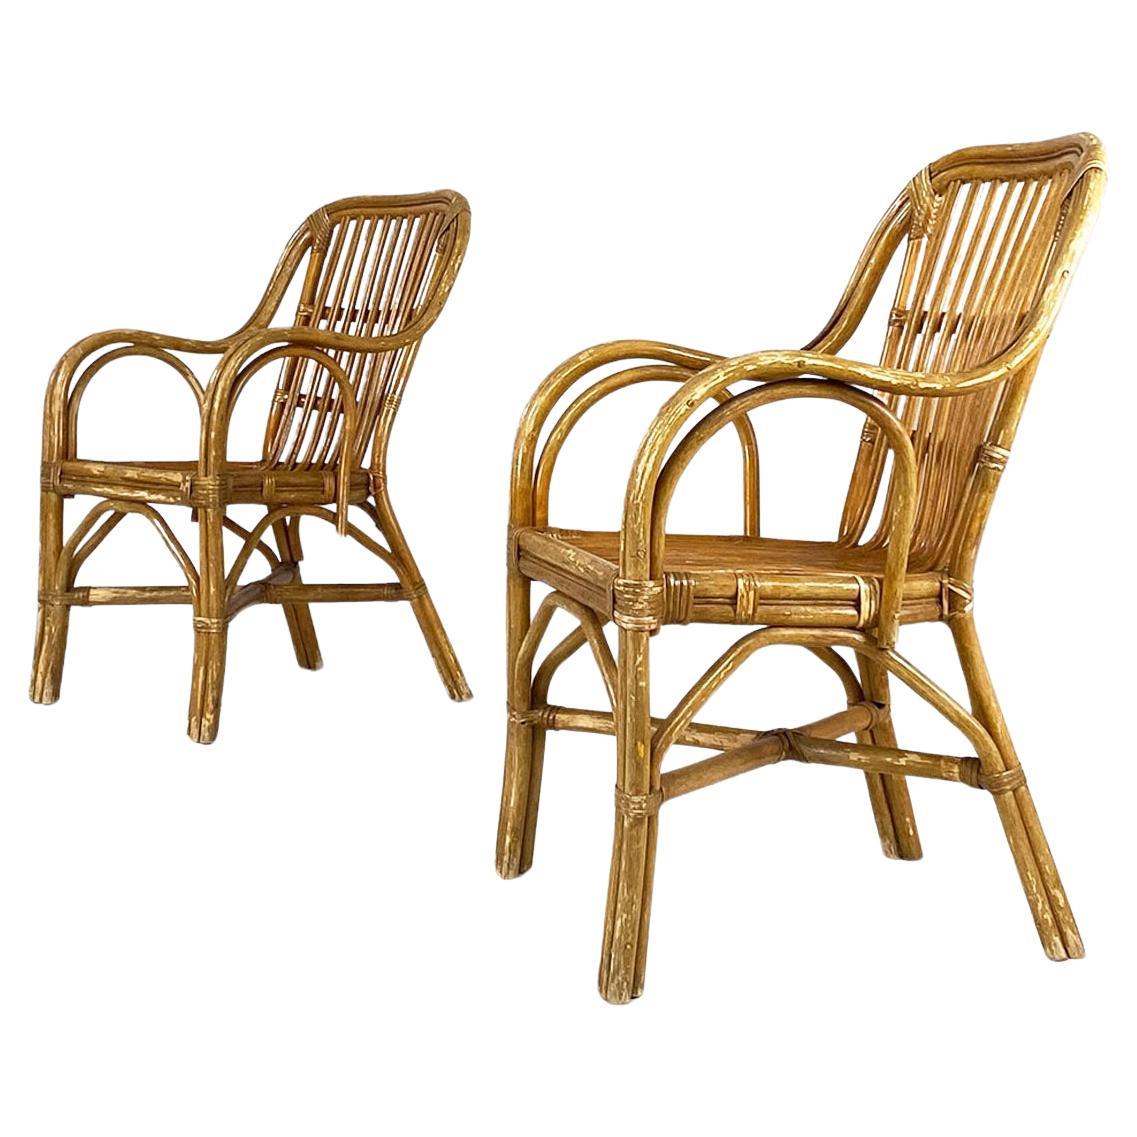 Italian mid-century modern rattan armchairs with curved armrests, 1960s